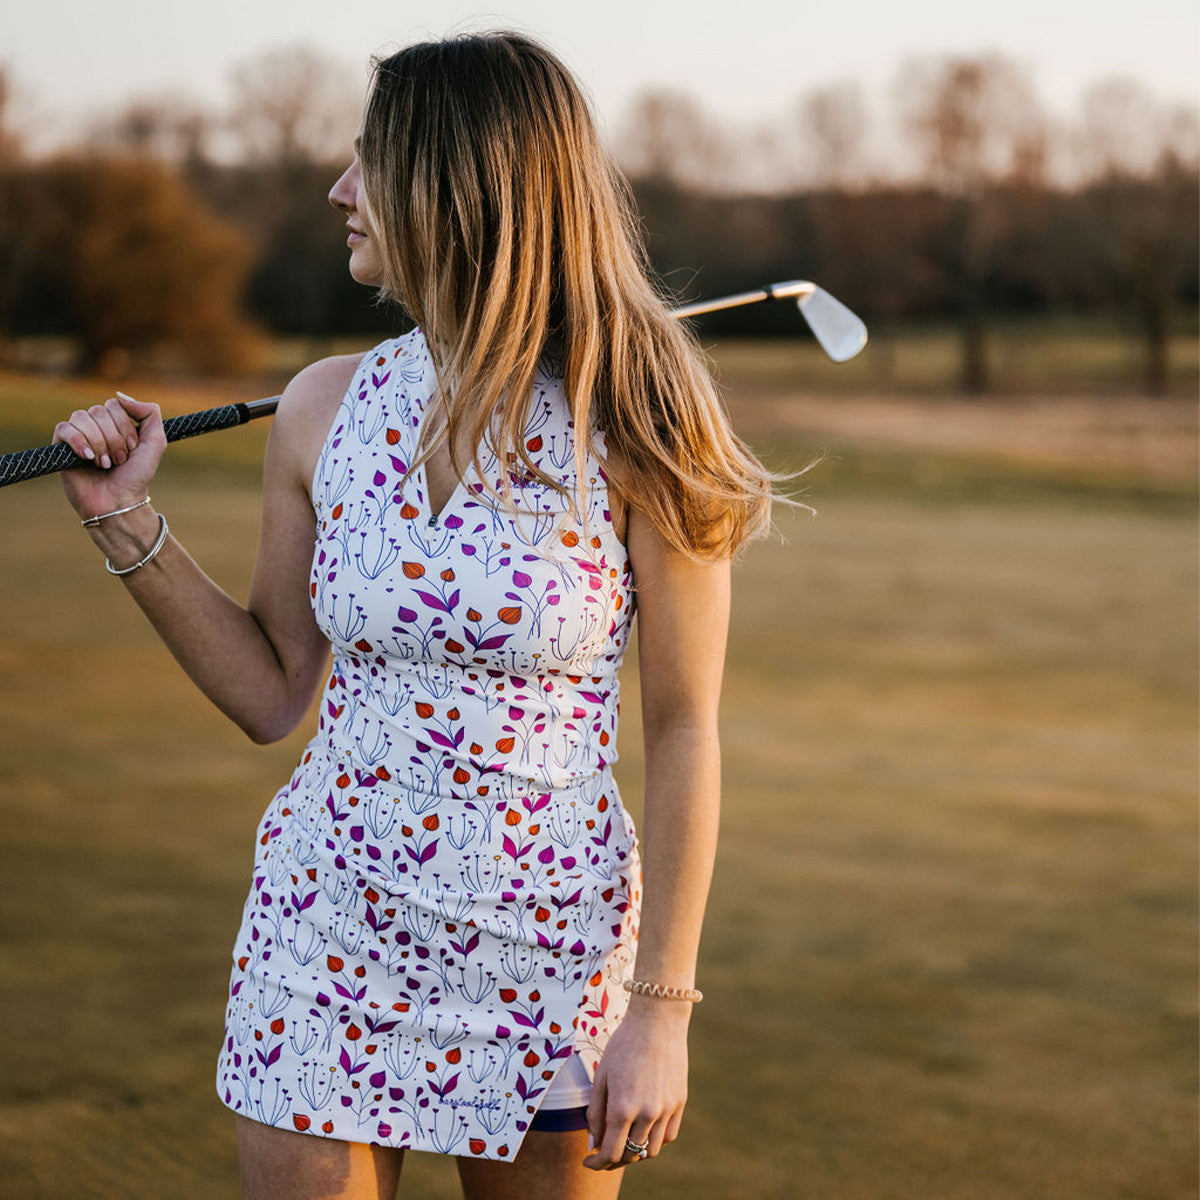 Barstool Golf Women's Floral Sleeveless Top II-T-Shirts-Fore Play-Barstool Sports